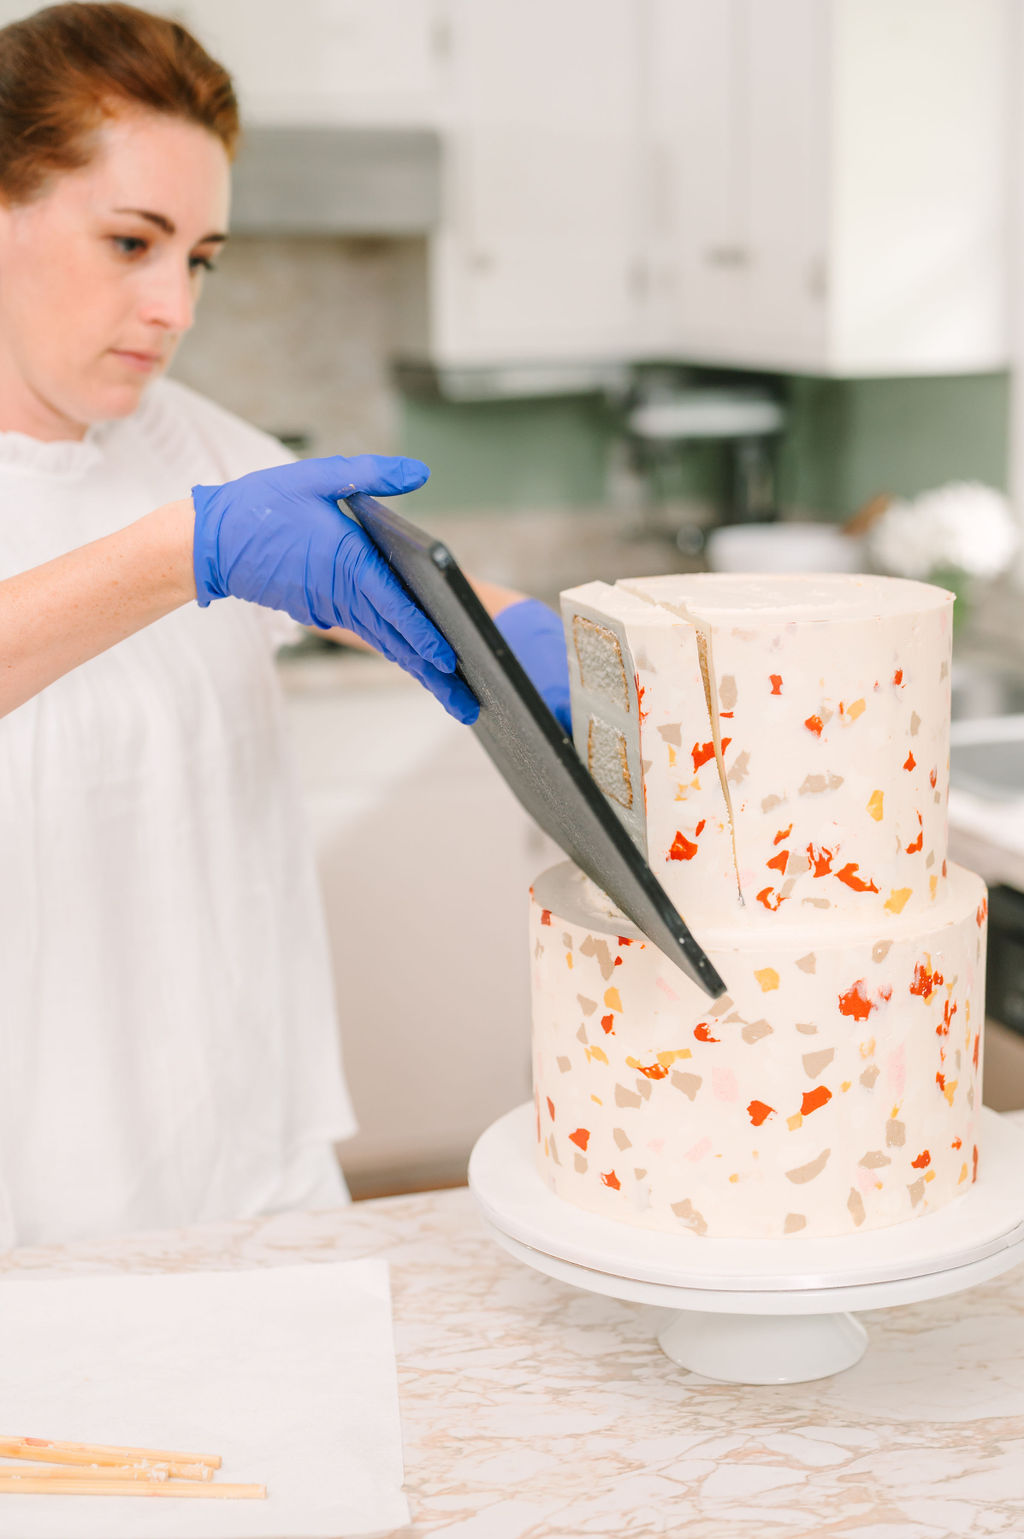 How To Cut A Wedding Cake